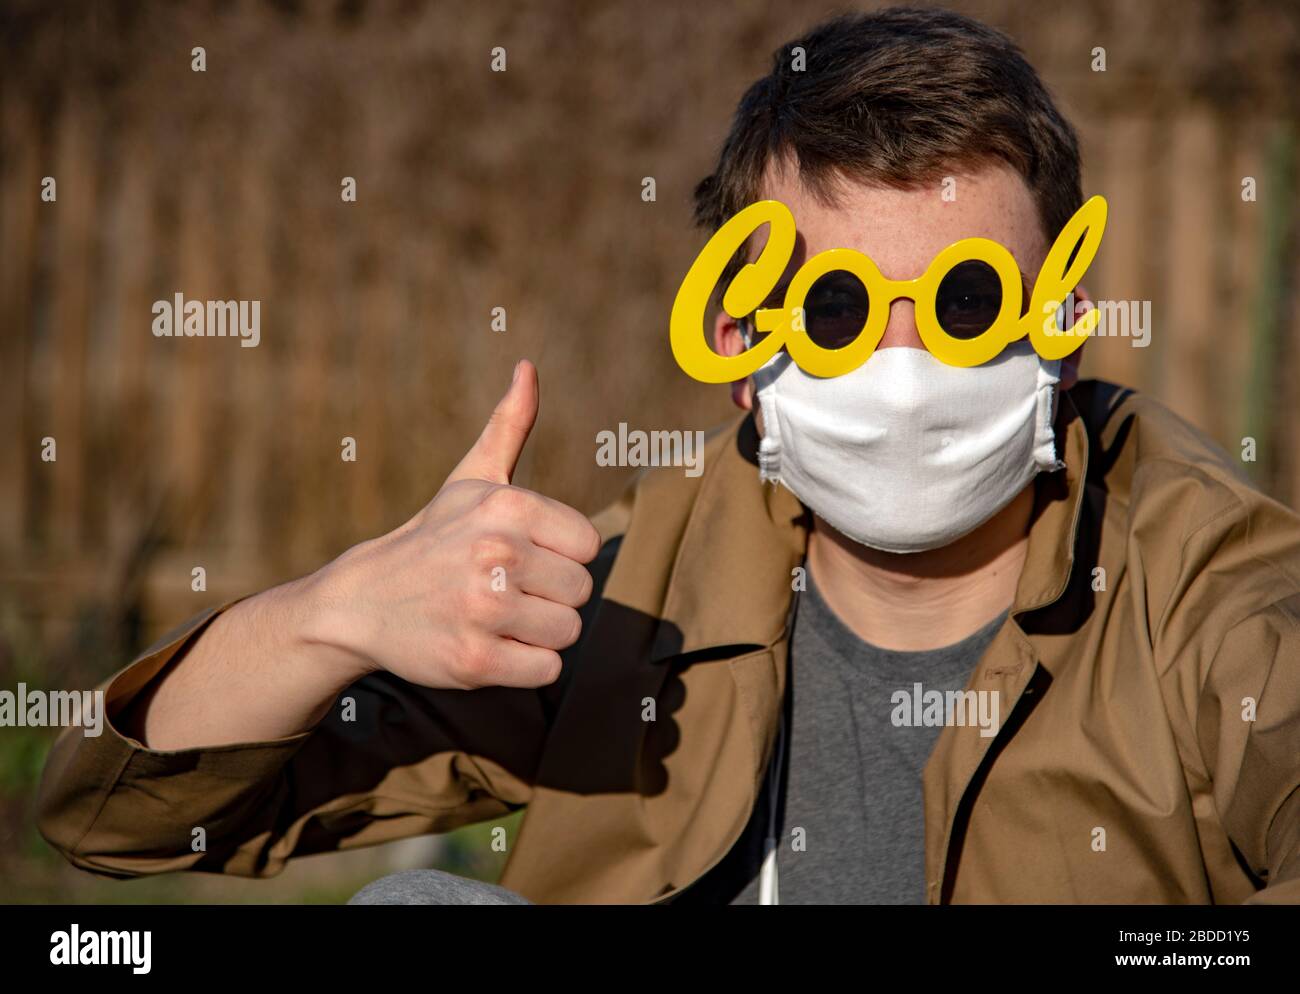 Portrait of a young man in a mask and funny sunglasses, indicating with gestures that everything will be fine.  Stock Photo